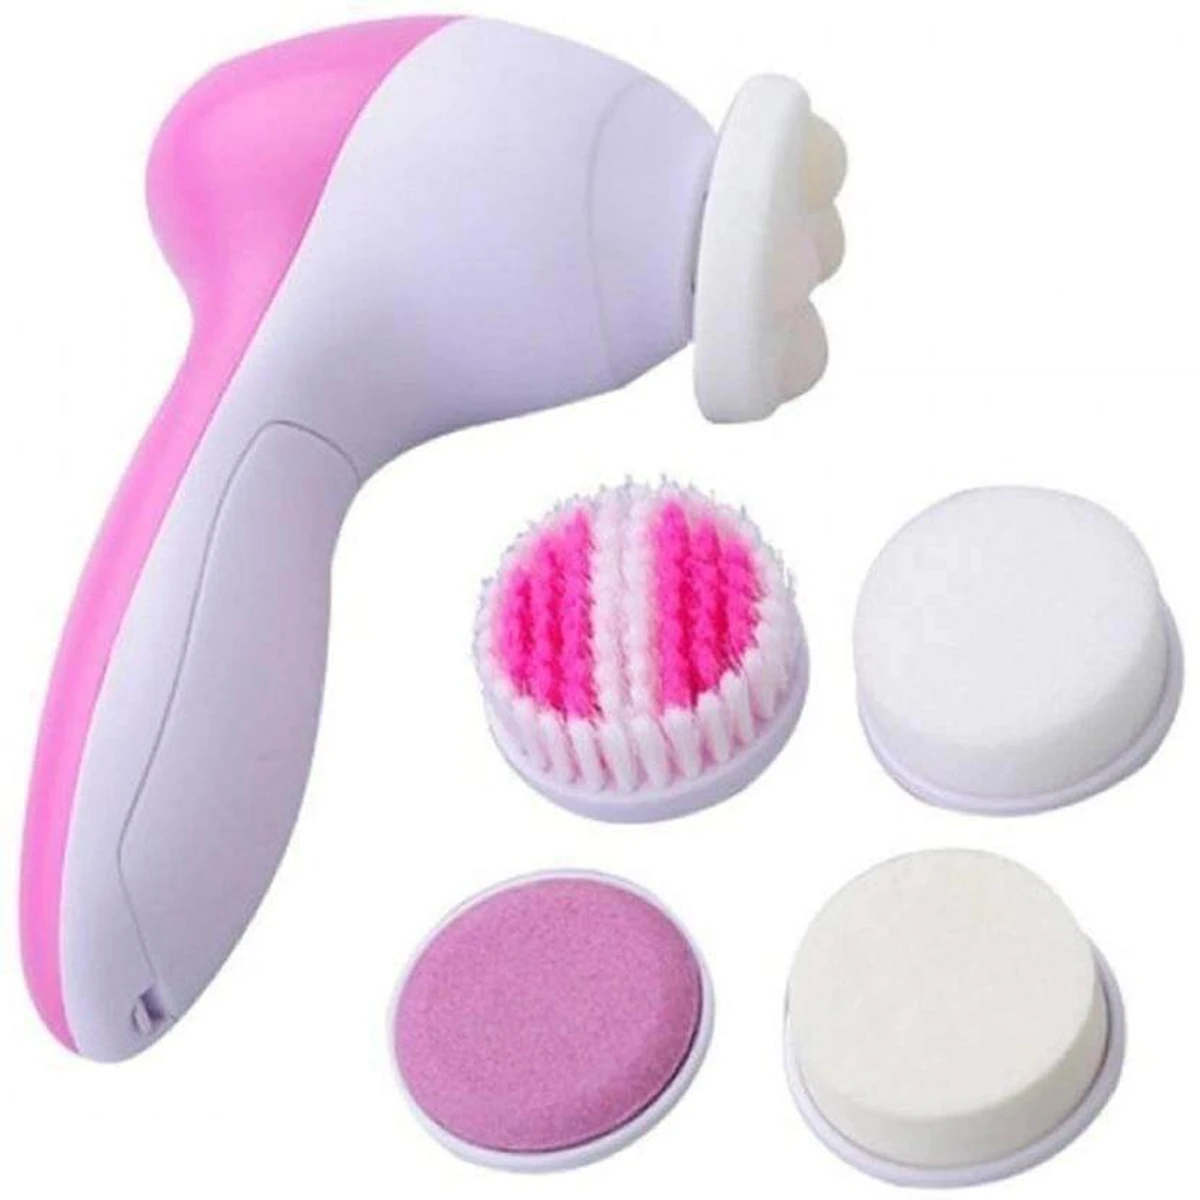 5-in-1 Facial Body Beauty Care Massager Electric Machine Roller for Smooth Skin Face